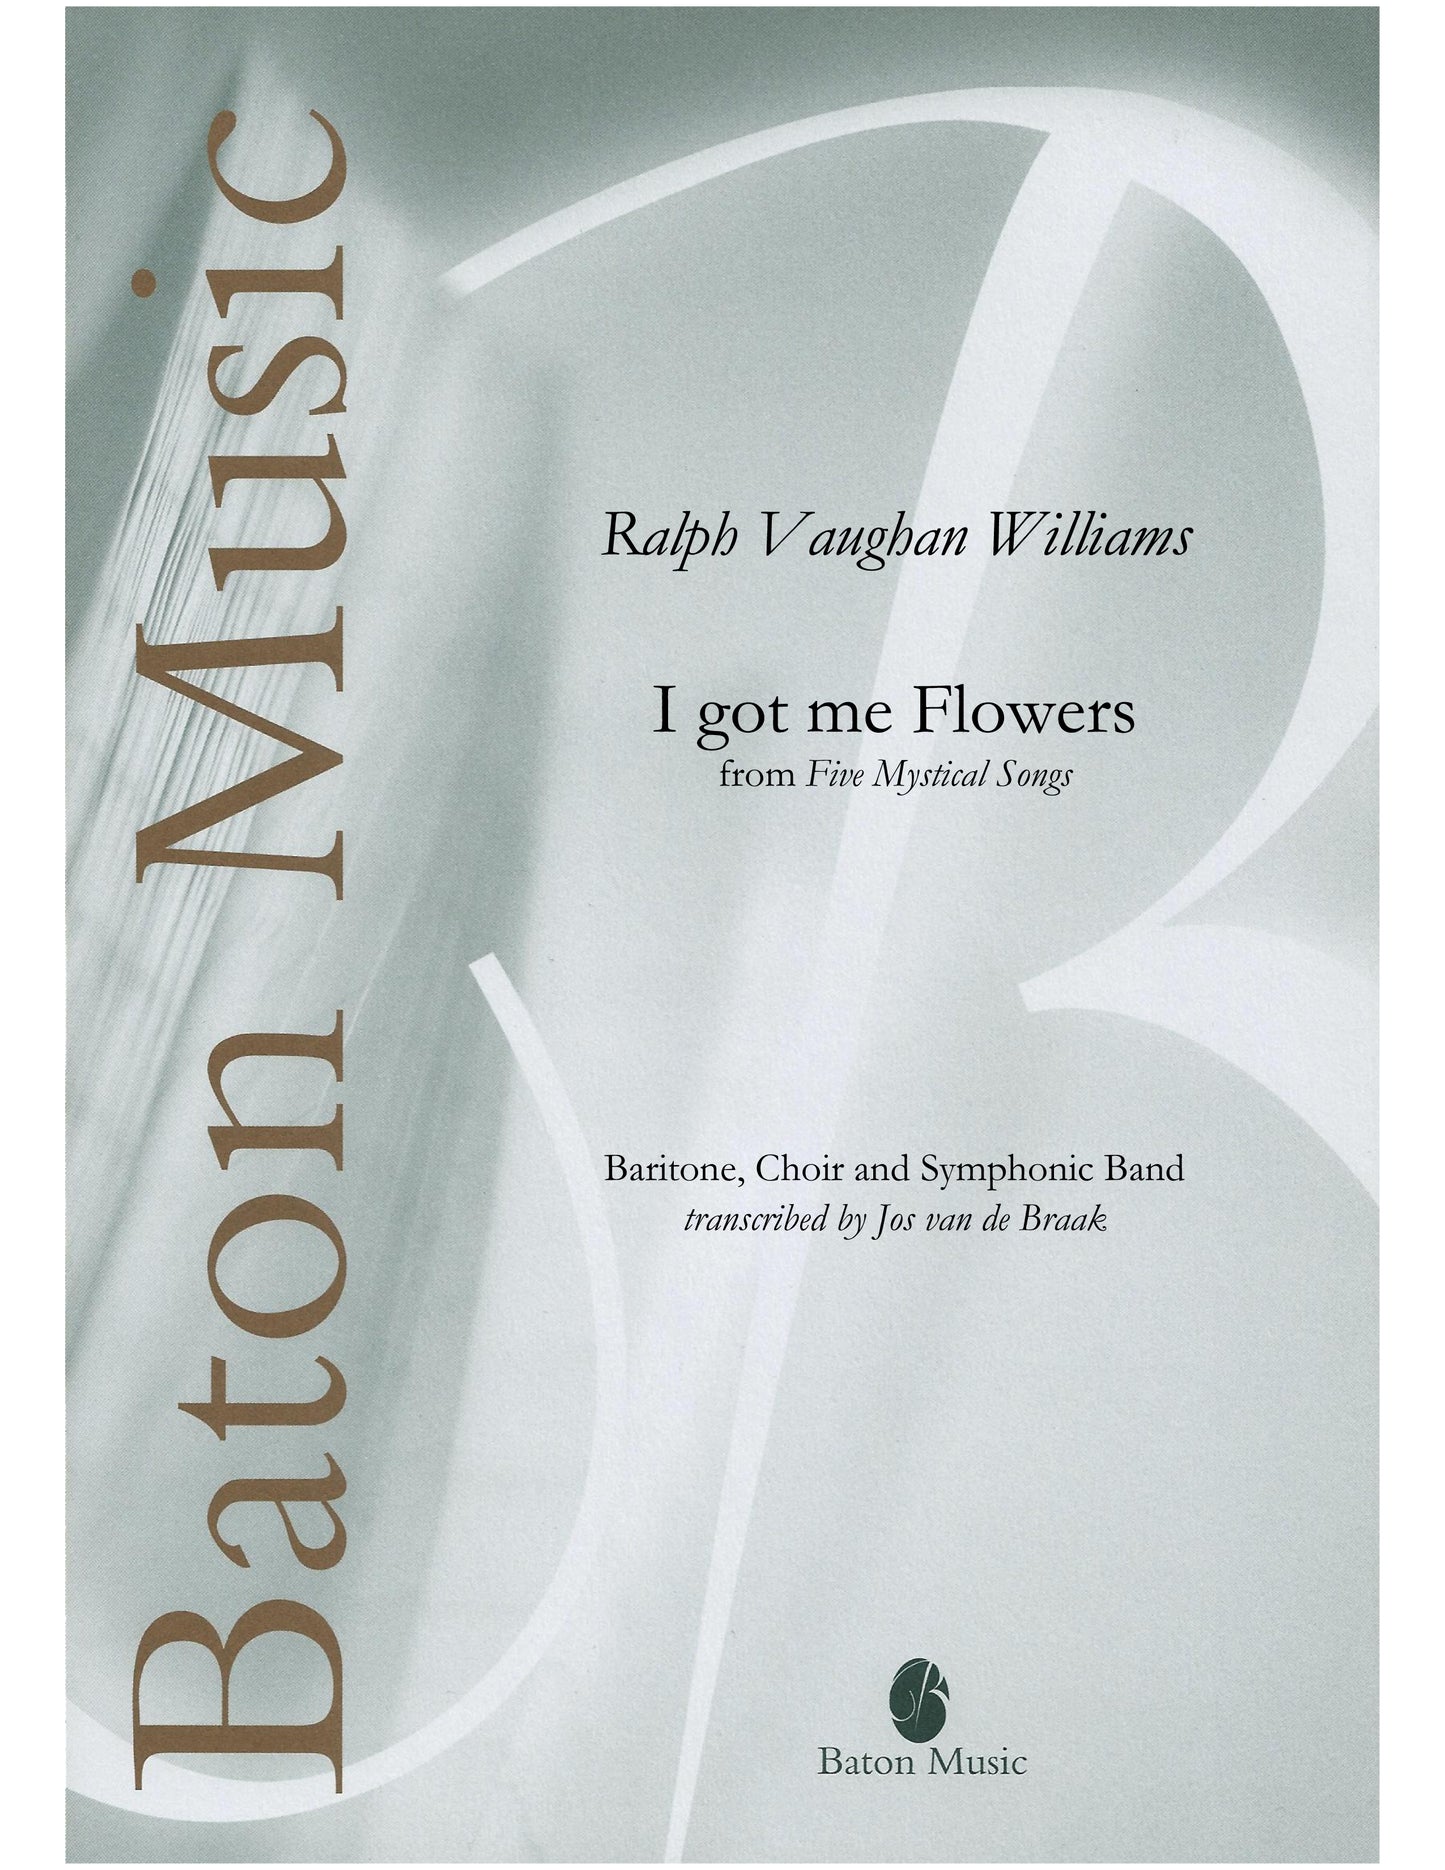 I got me Flowers (from Five Mystical Songs) - Ralph Vaughan Williams